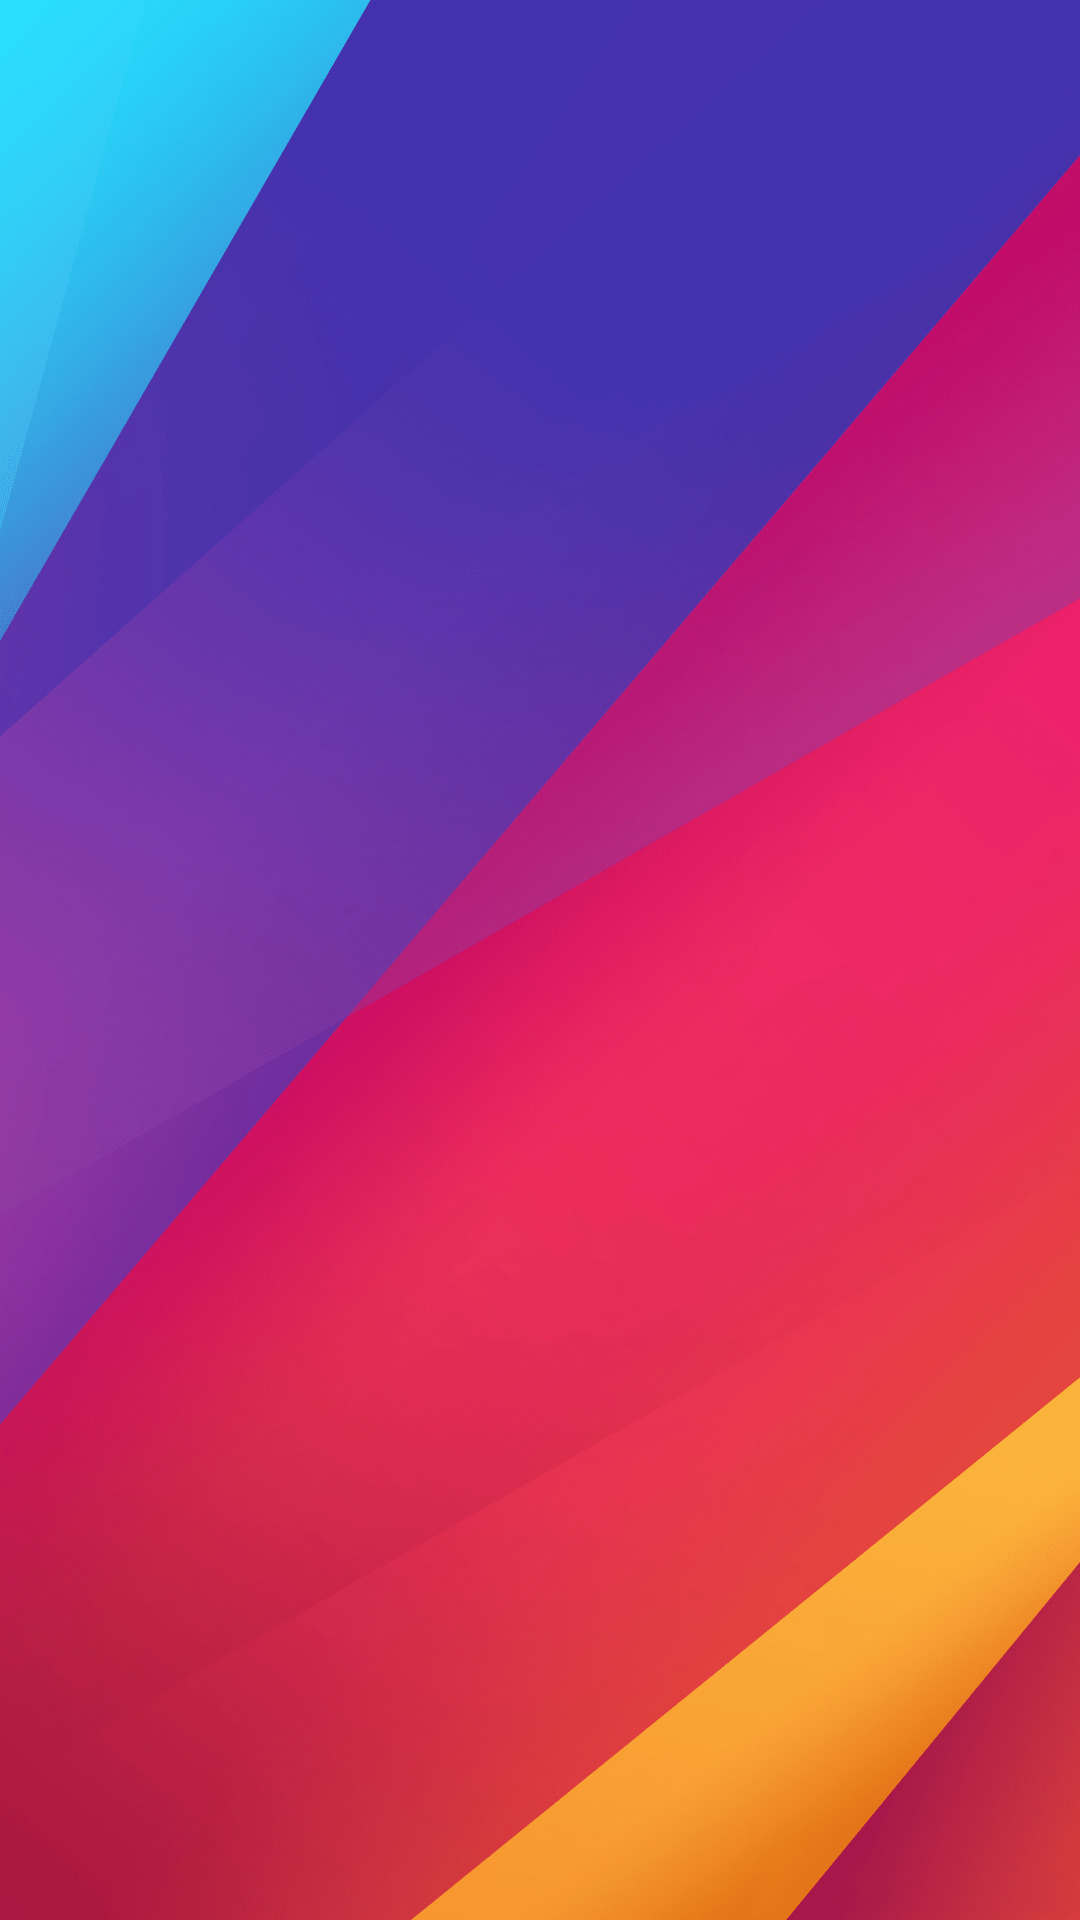 Flyme OS 5.0 HD wallpapers Mohamedovic 1 1